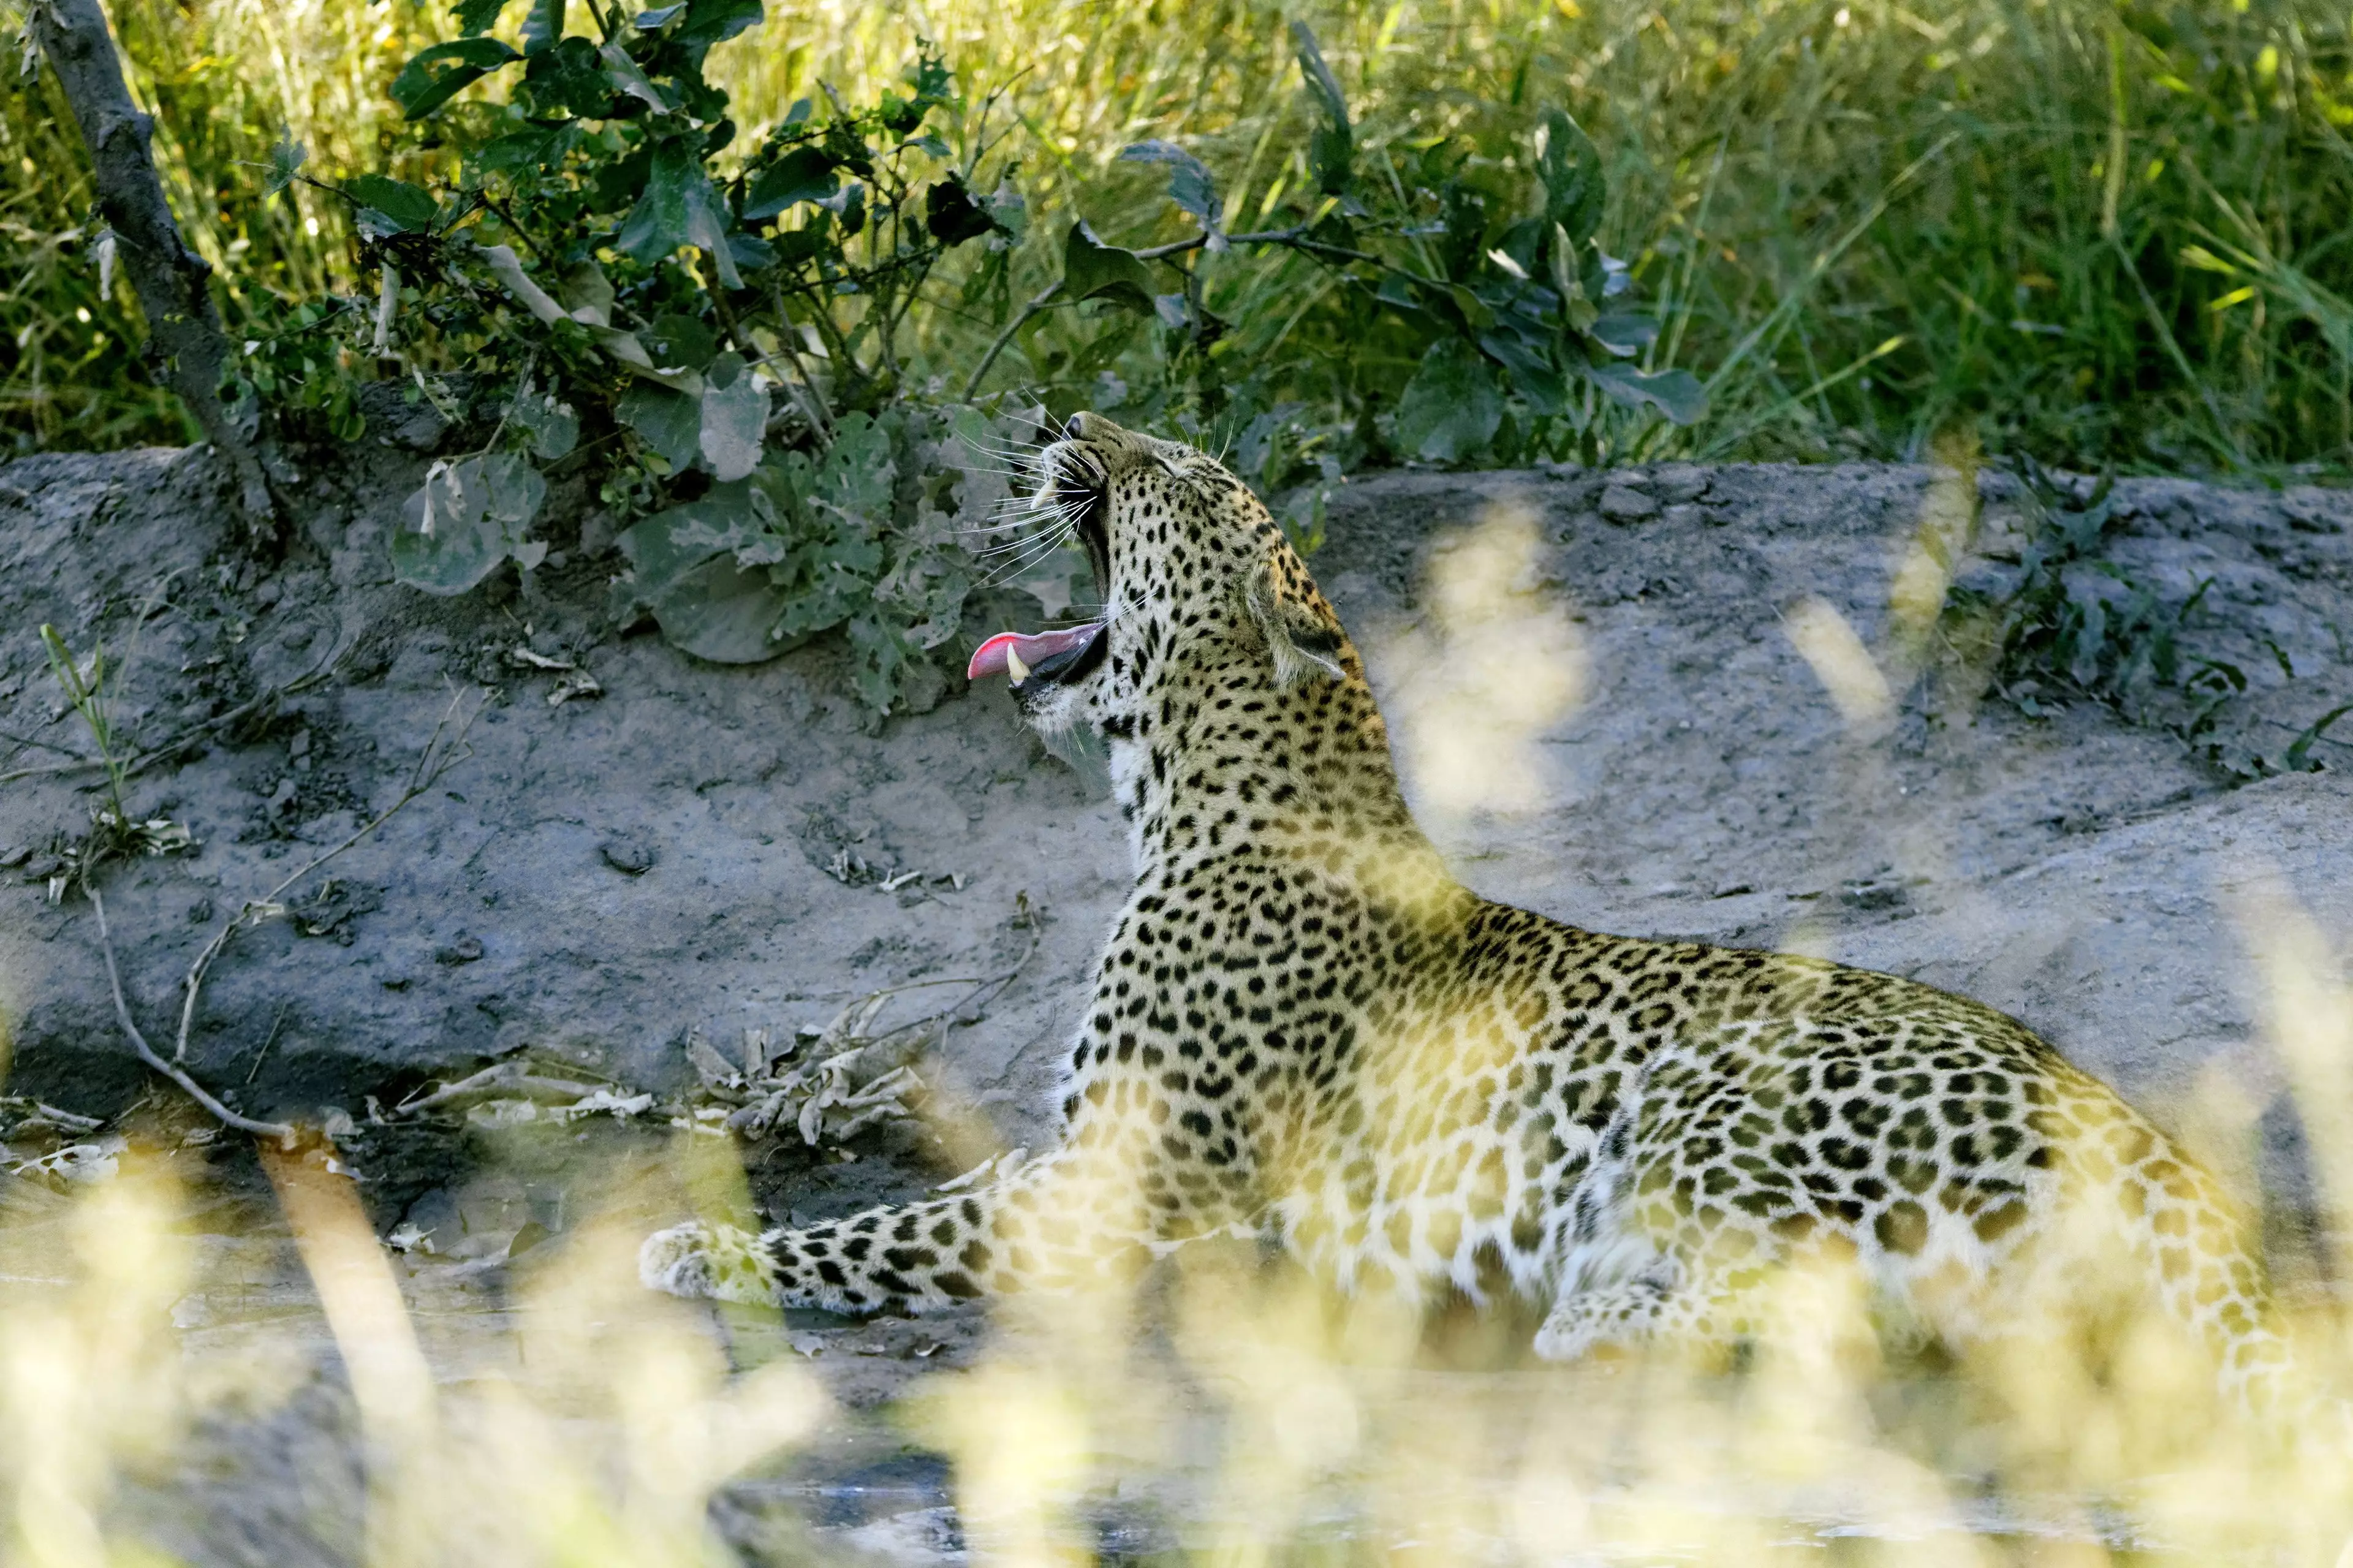 Kruger National Park is home to many big cats.